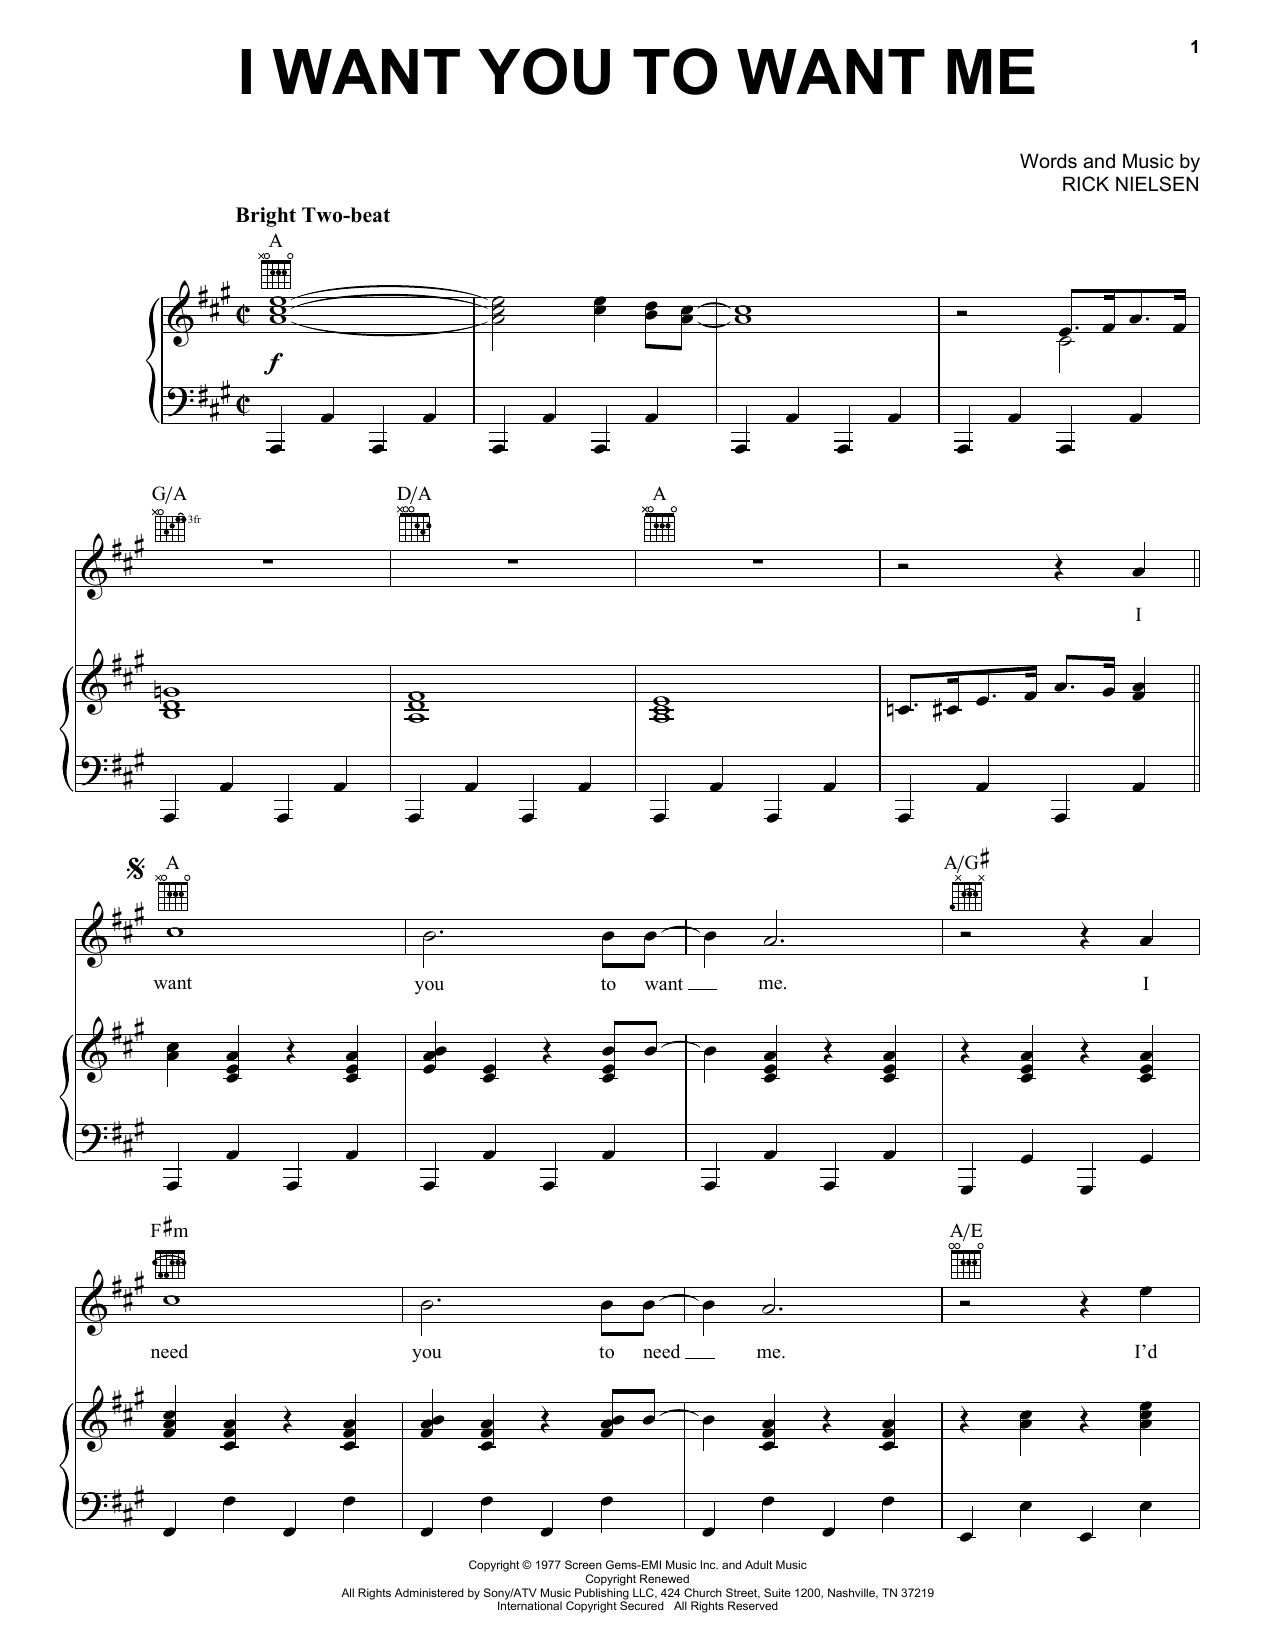 I Want You To Want Me sheet music